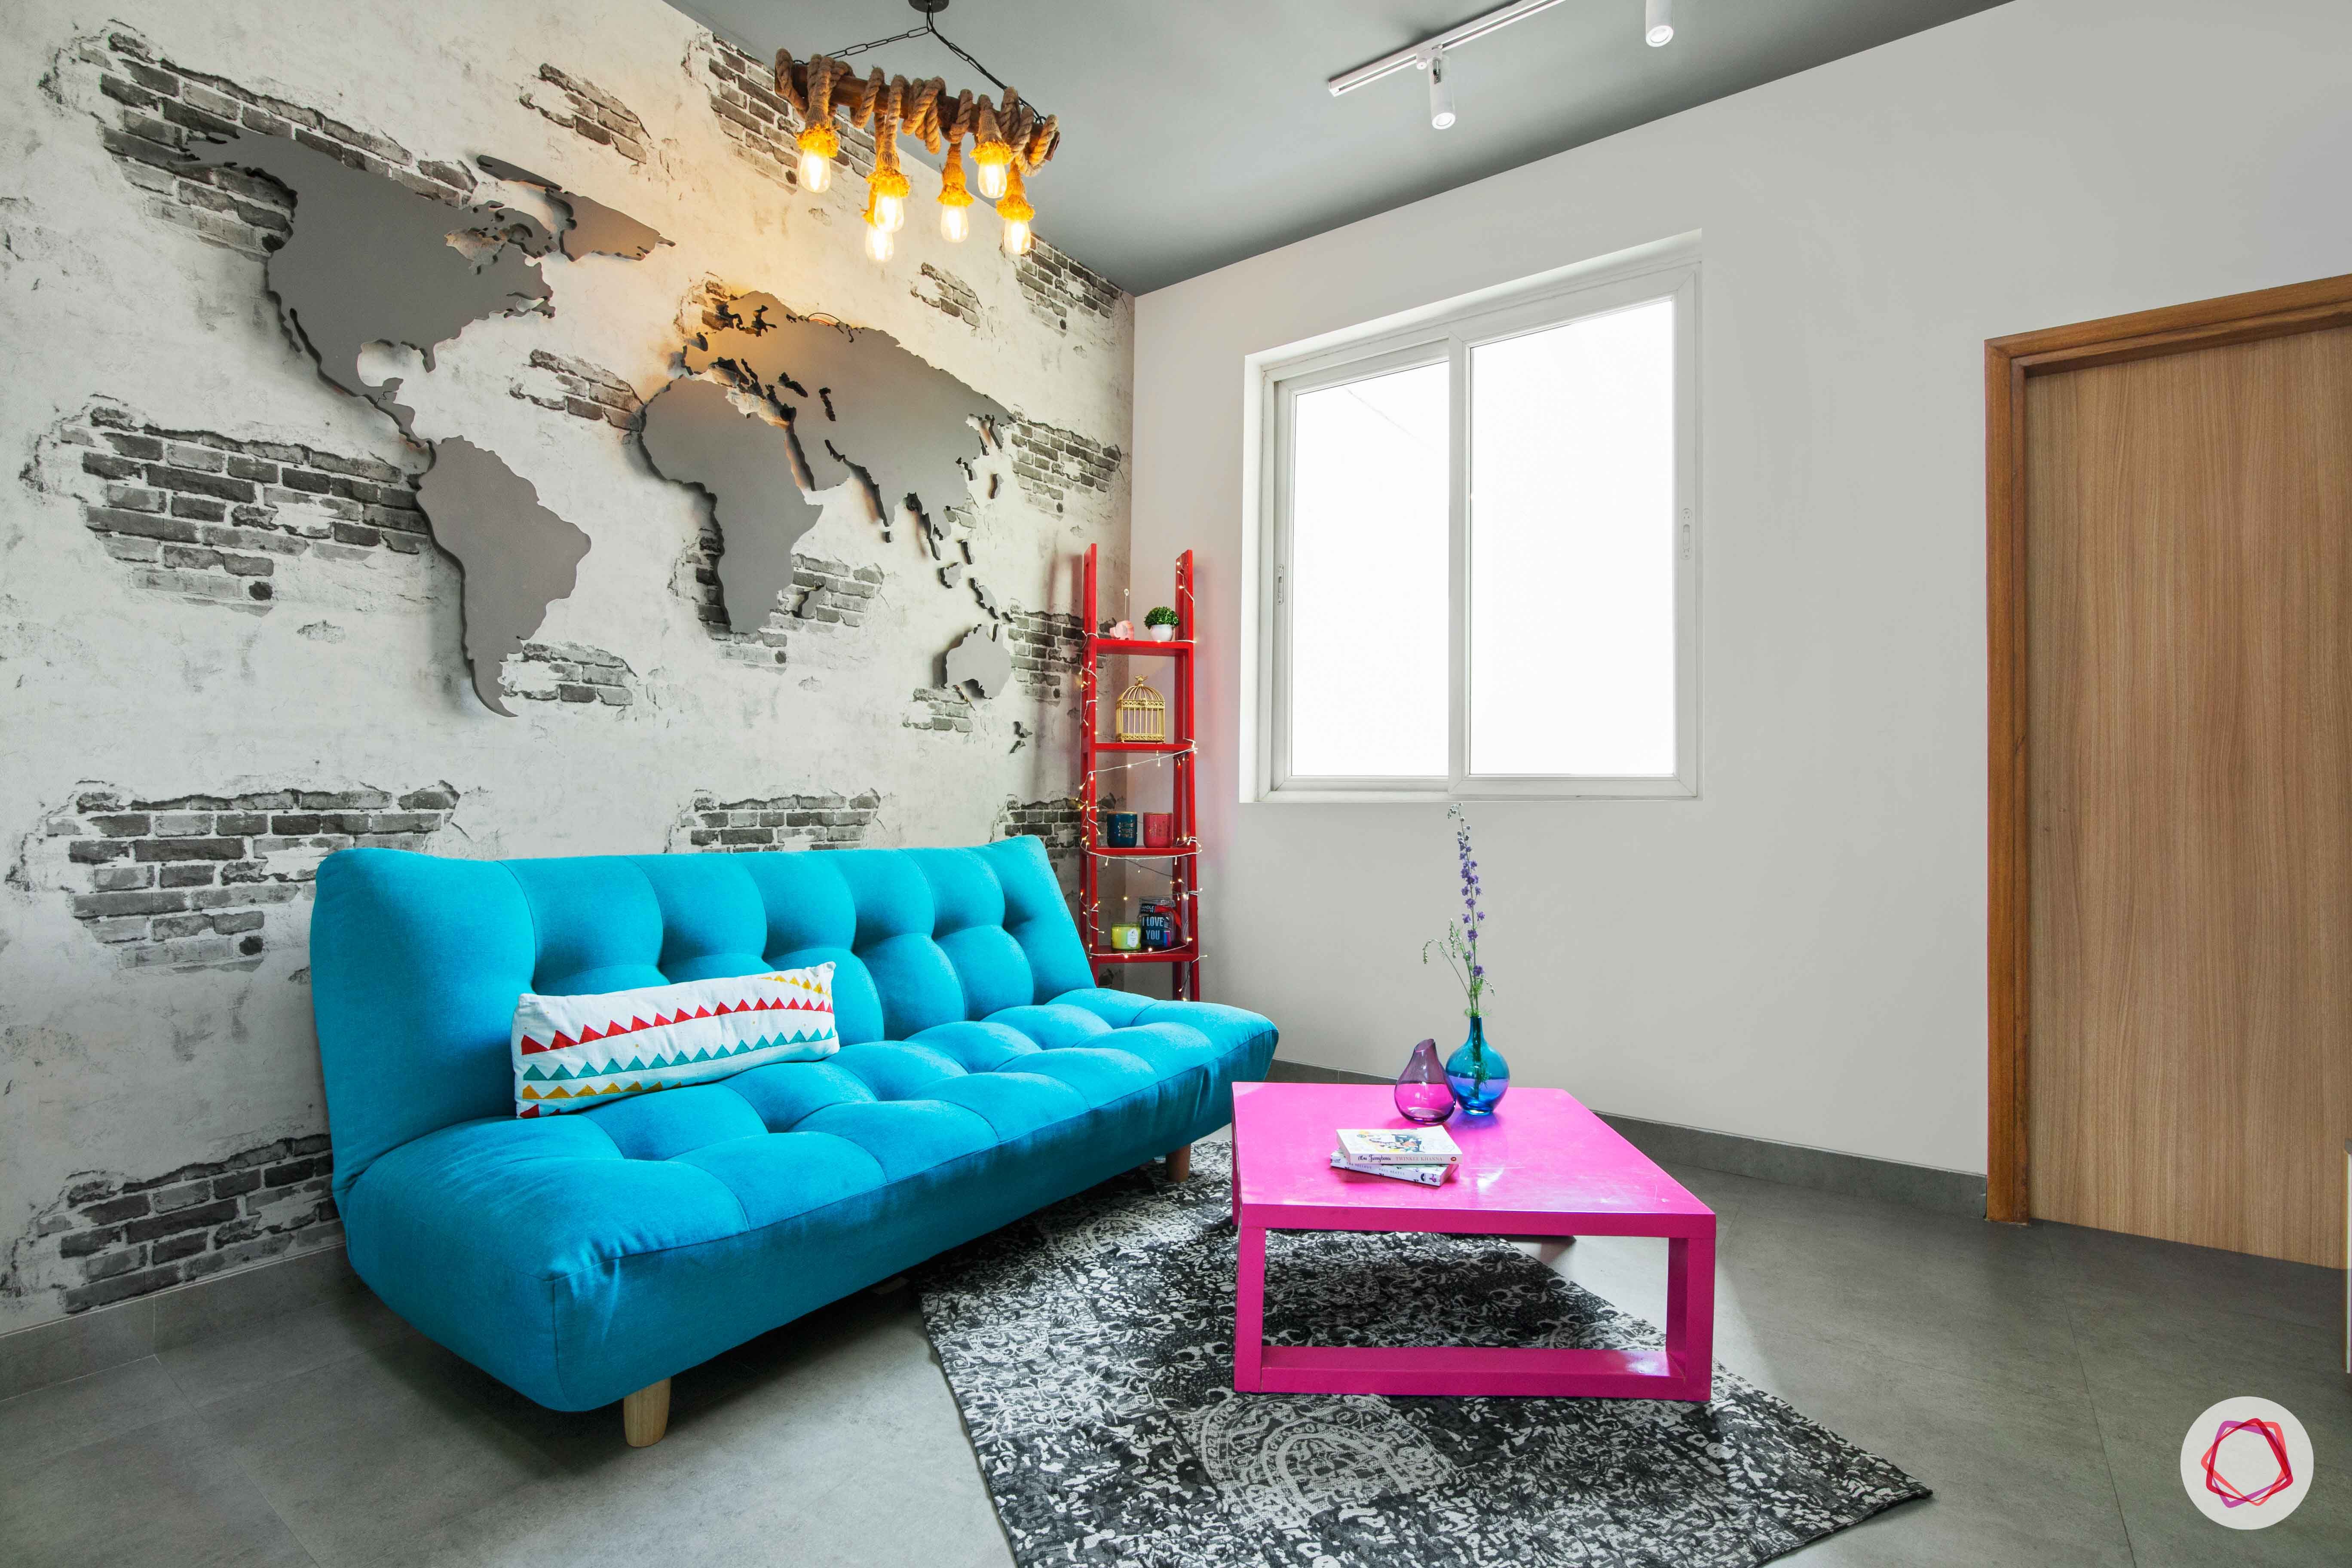 tdi ourania_blue sofa cum bed_pink table_exposed brick wall